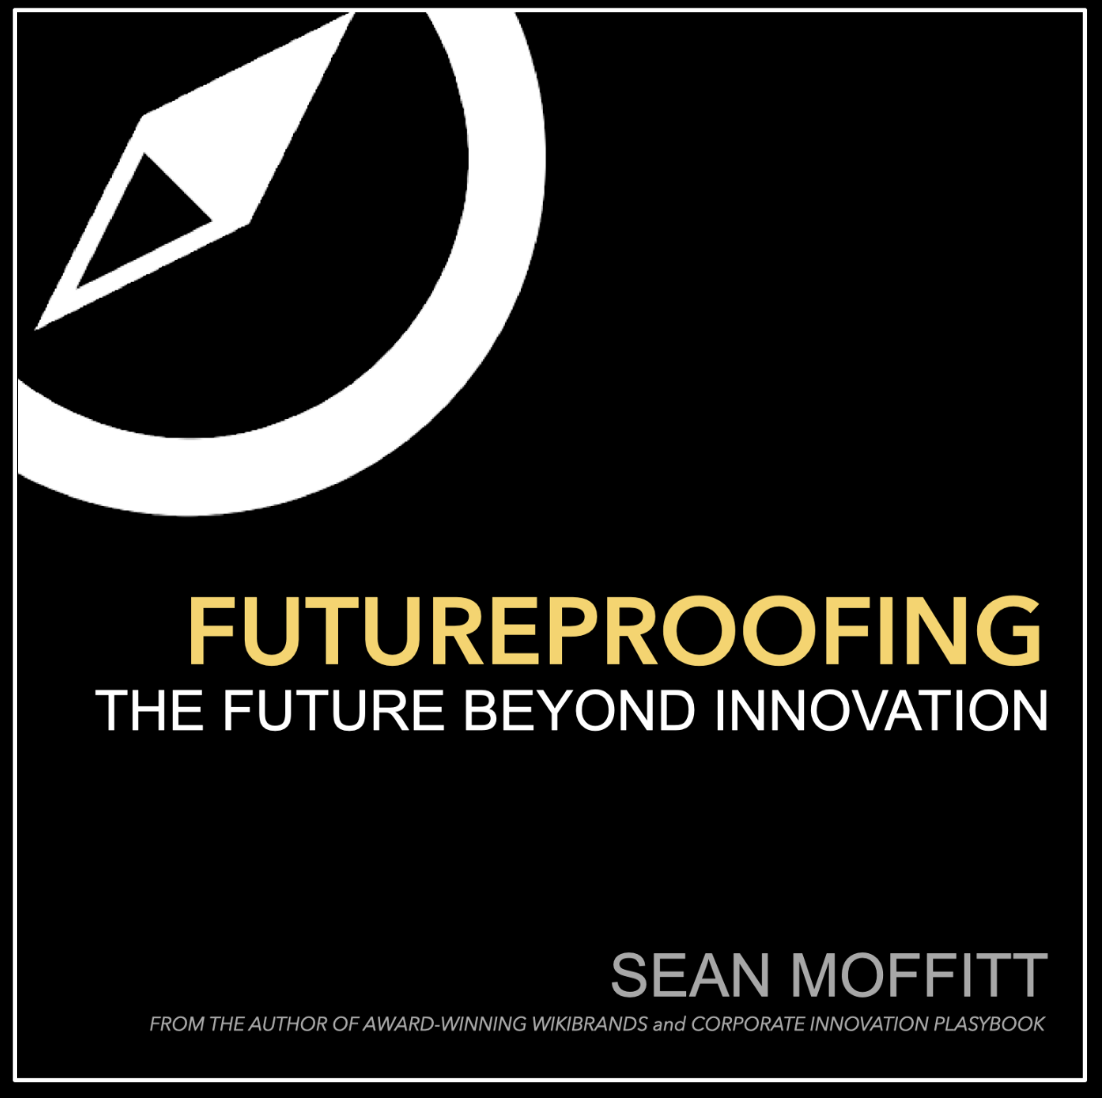 Futureproofing - The Future Beyond Innovation by Sean Mofiftt